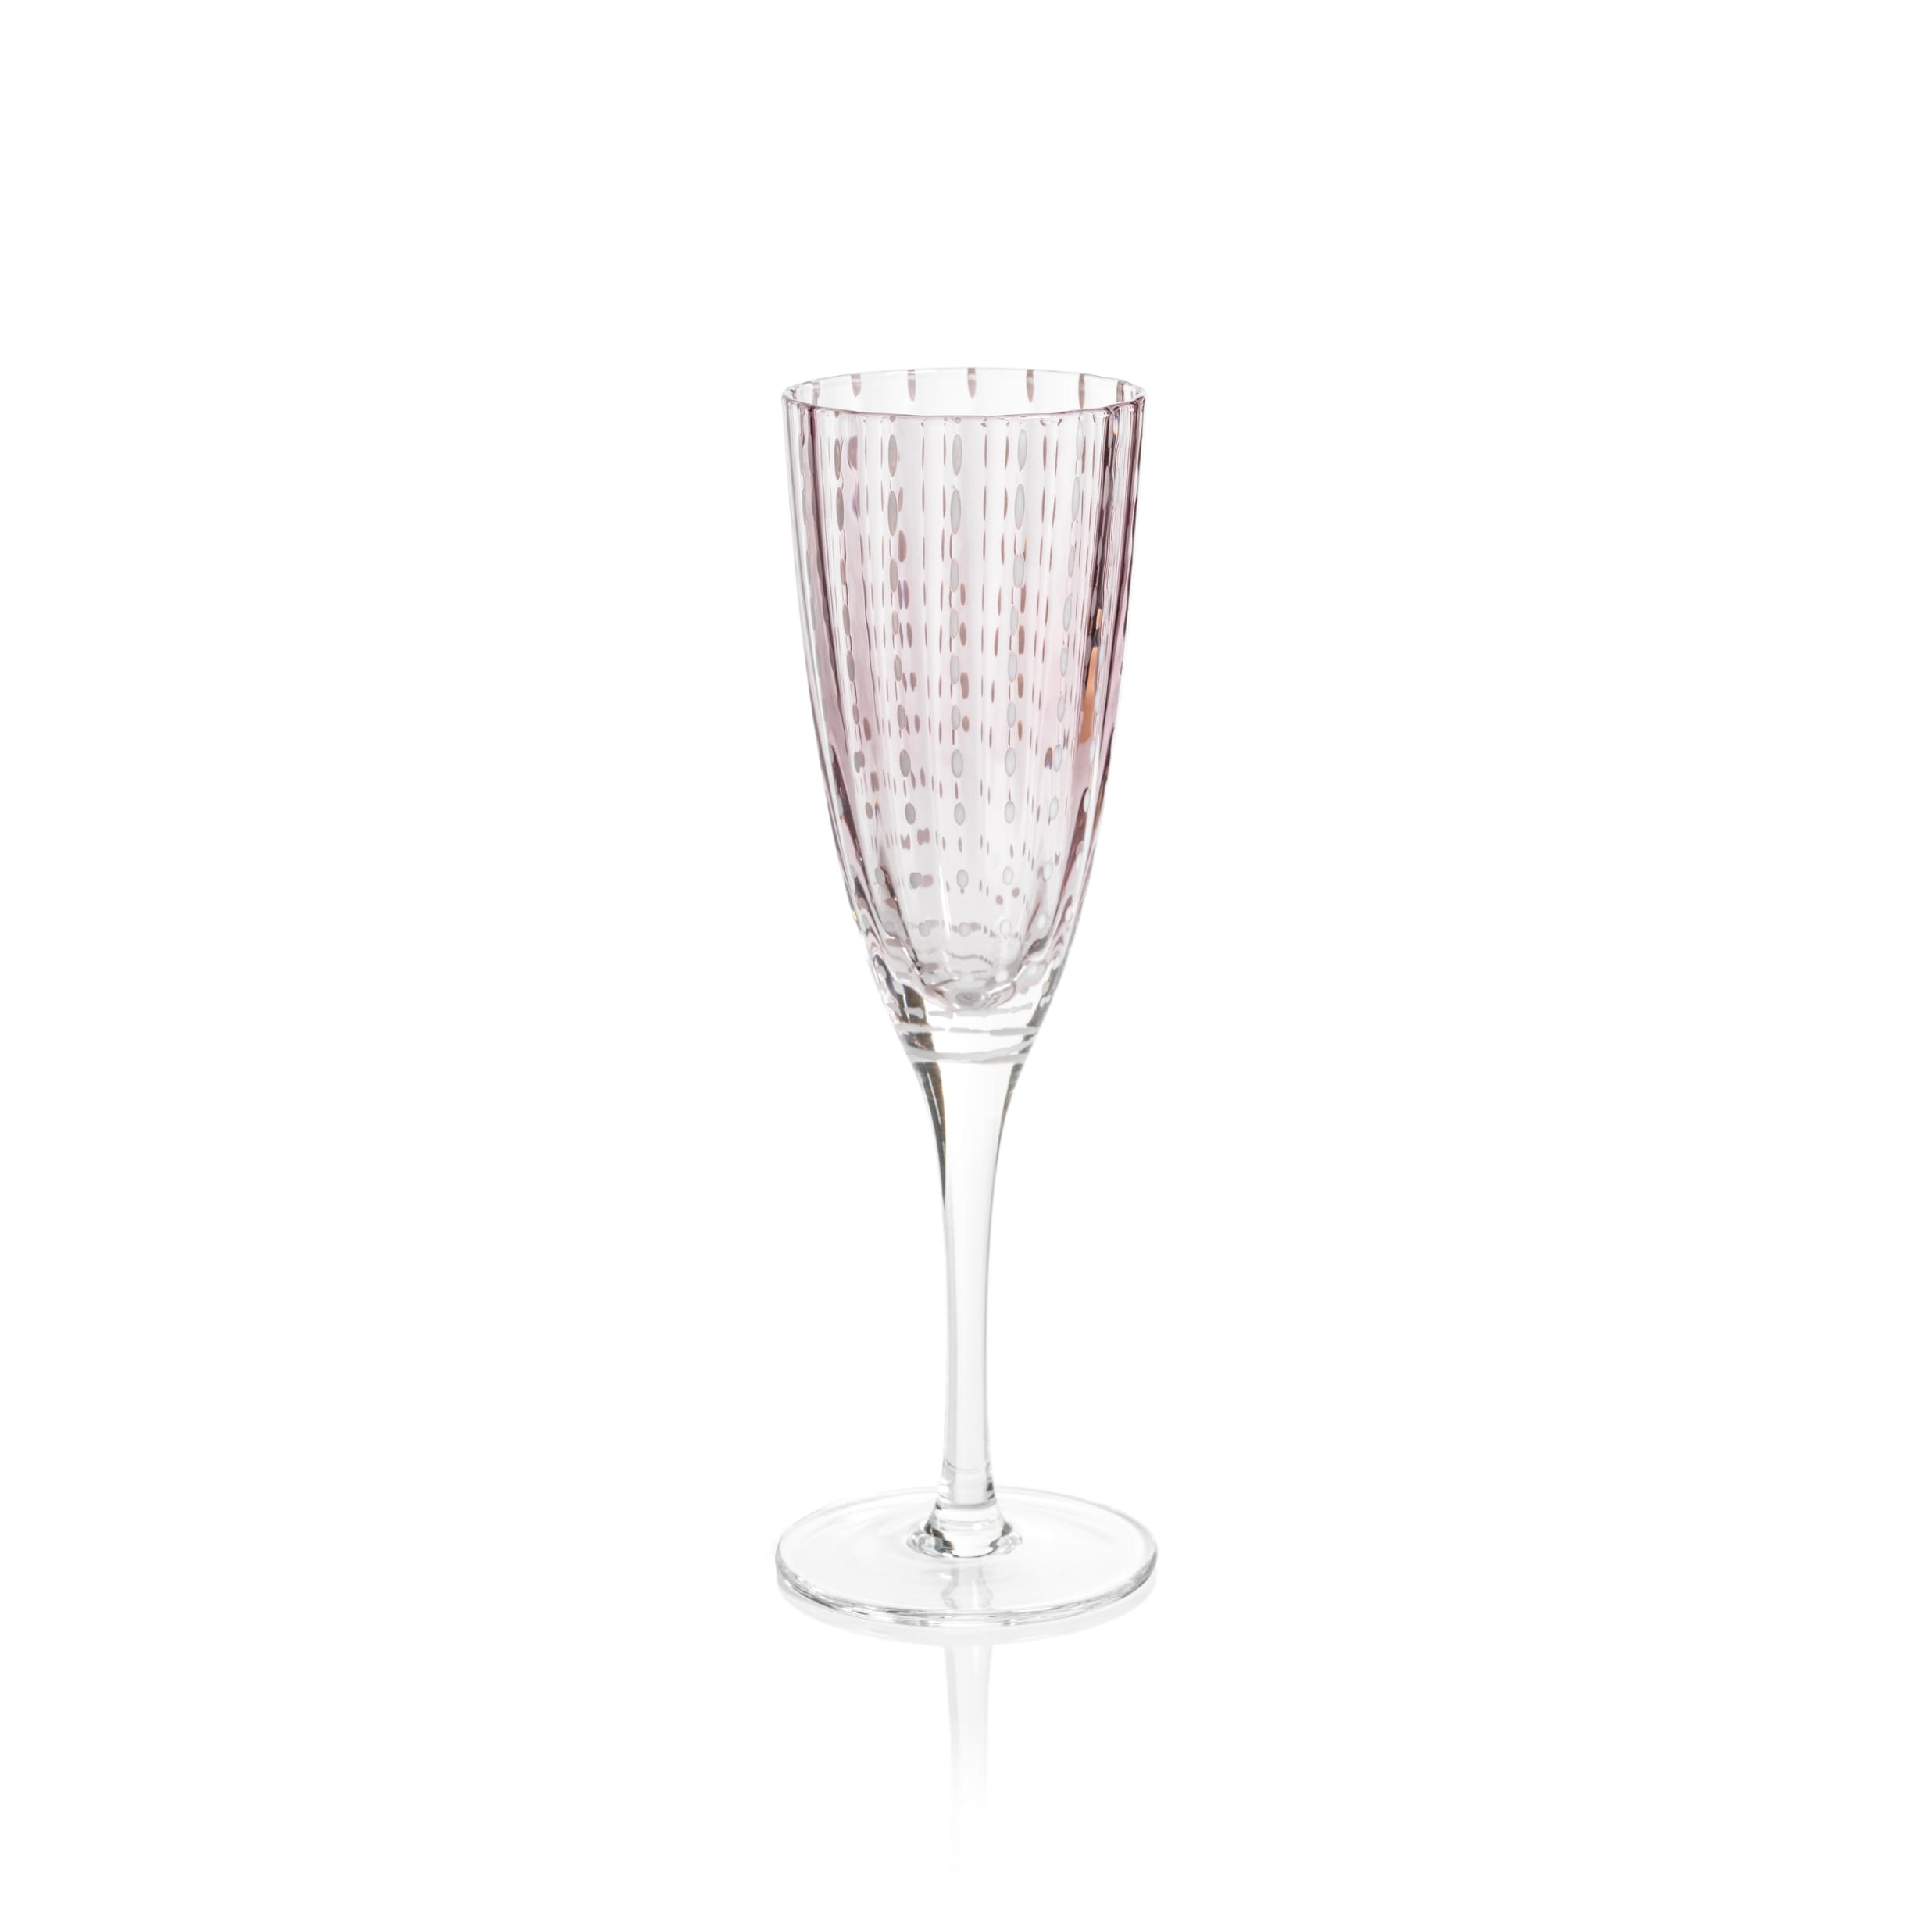 https://ak1.ostkcdn.com/images/products/is/images/direct/3ddb608275935b289ed154d534b35aba6796071f/Pescara-White-Dot-Champagne-Flutes%2C-Set-of-4.jpg